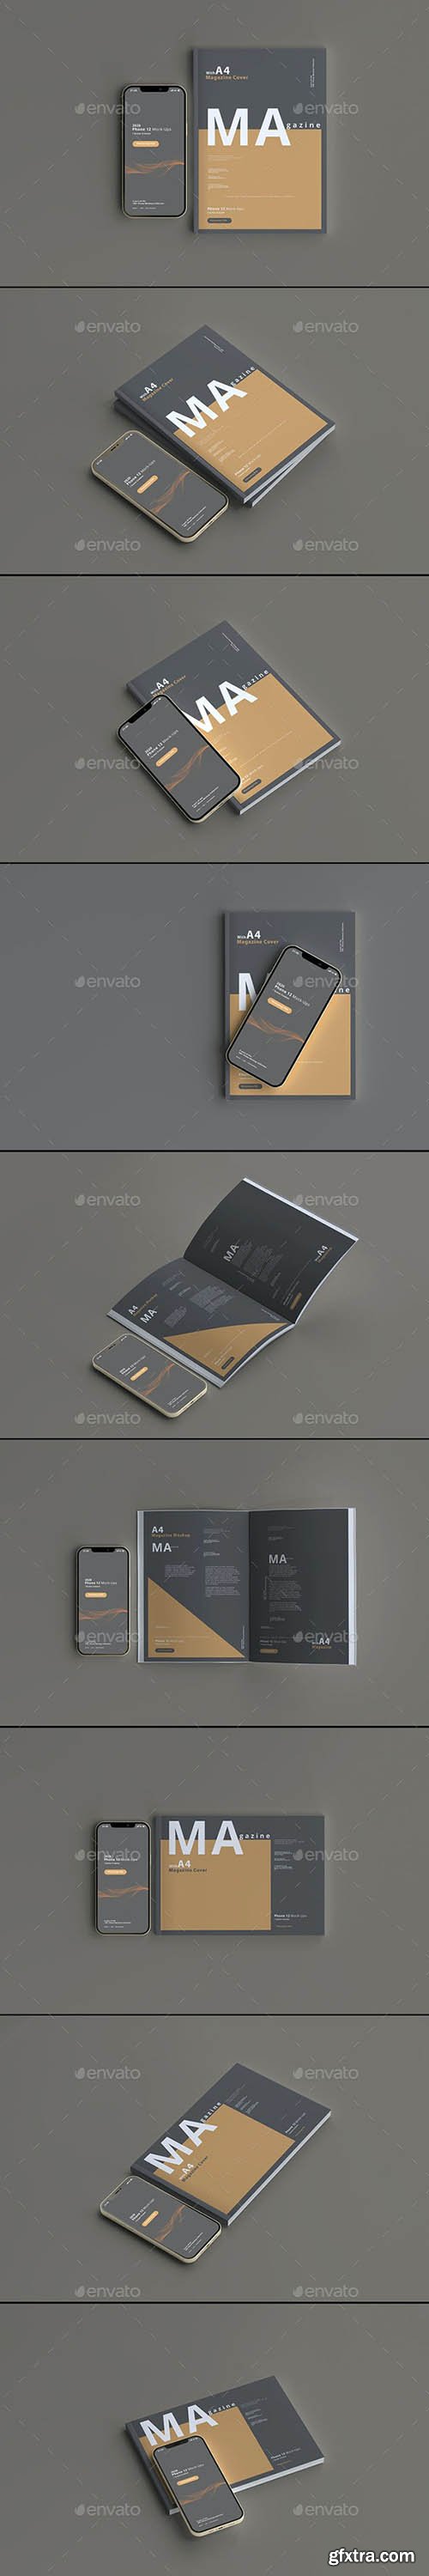 GraphicRiver - 2020 Smart Phone 12 Mockups with Magazine Covers 29123347